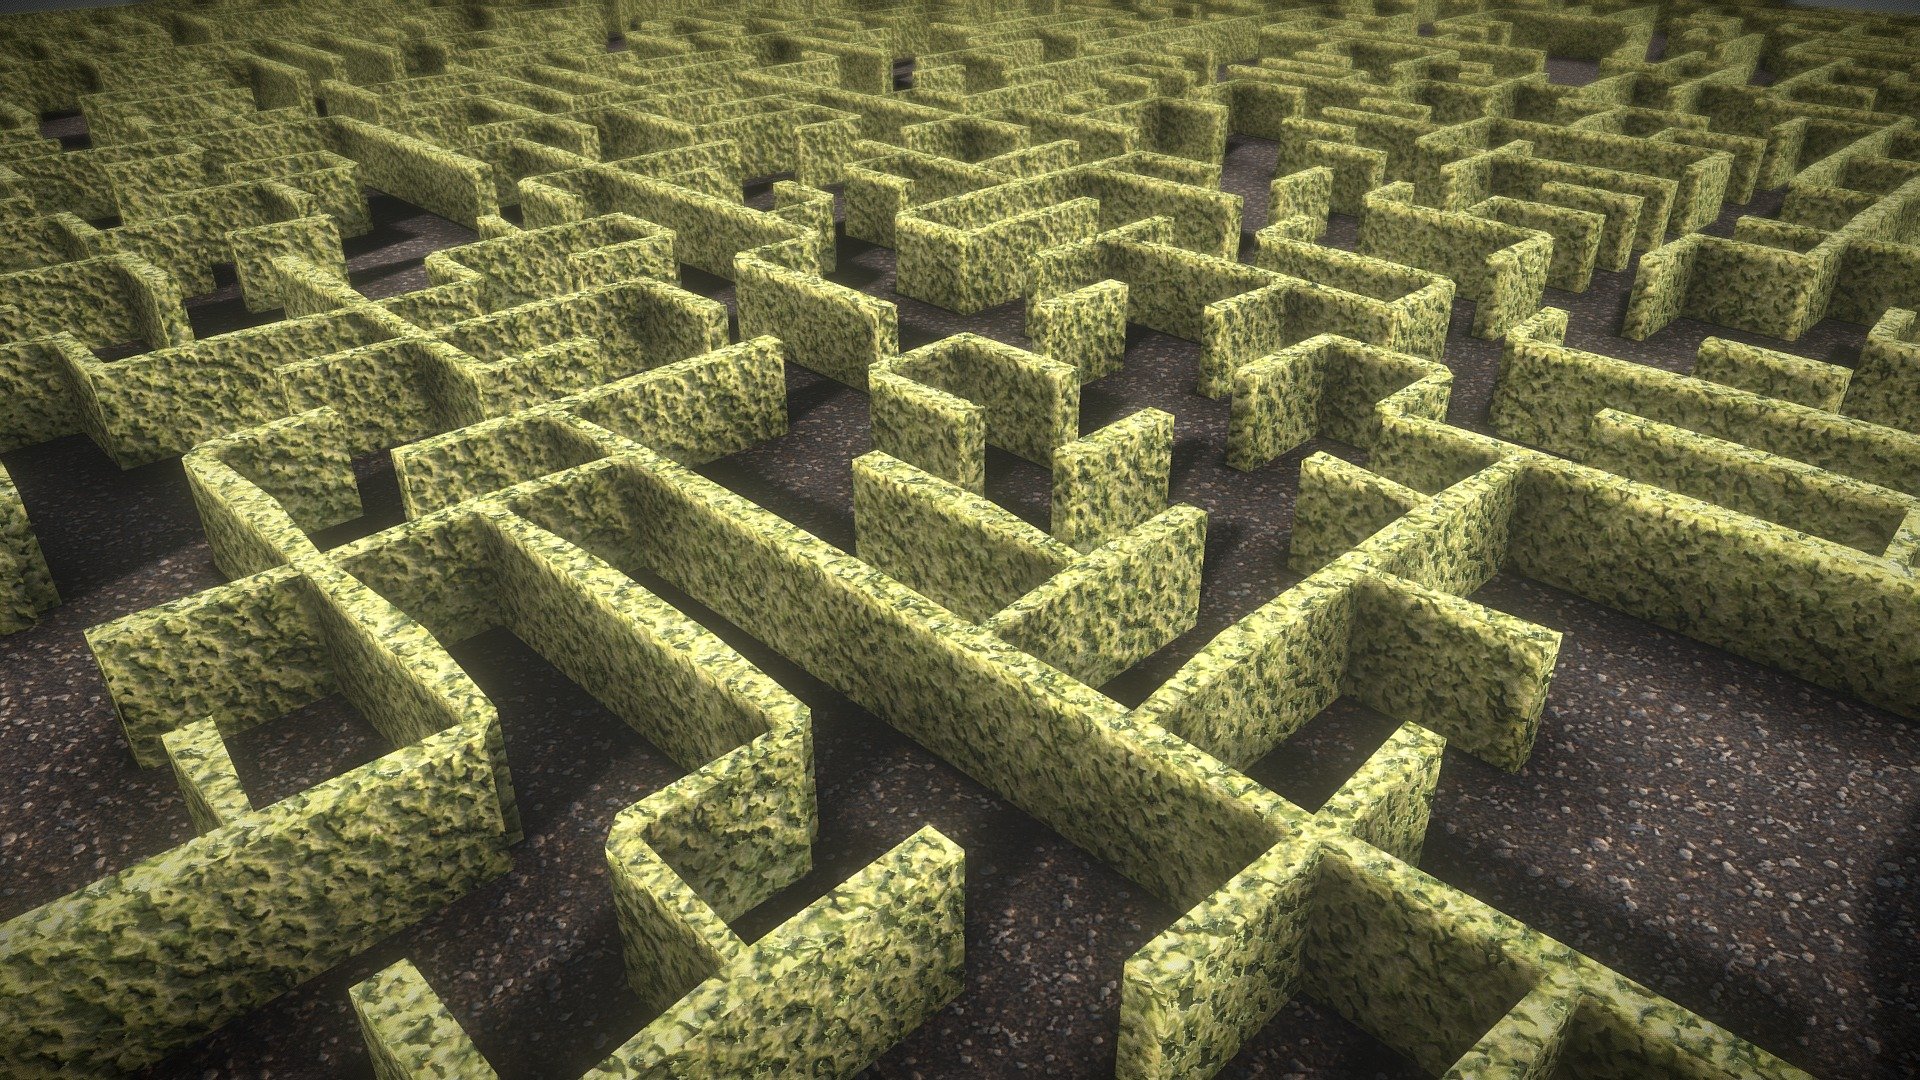 lowpoly maze garden environment, generated uv's, One mesh, 2 materials. Textures tiled, nothing baked so it is easy to replace with your own texturemaps 3d model